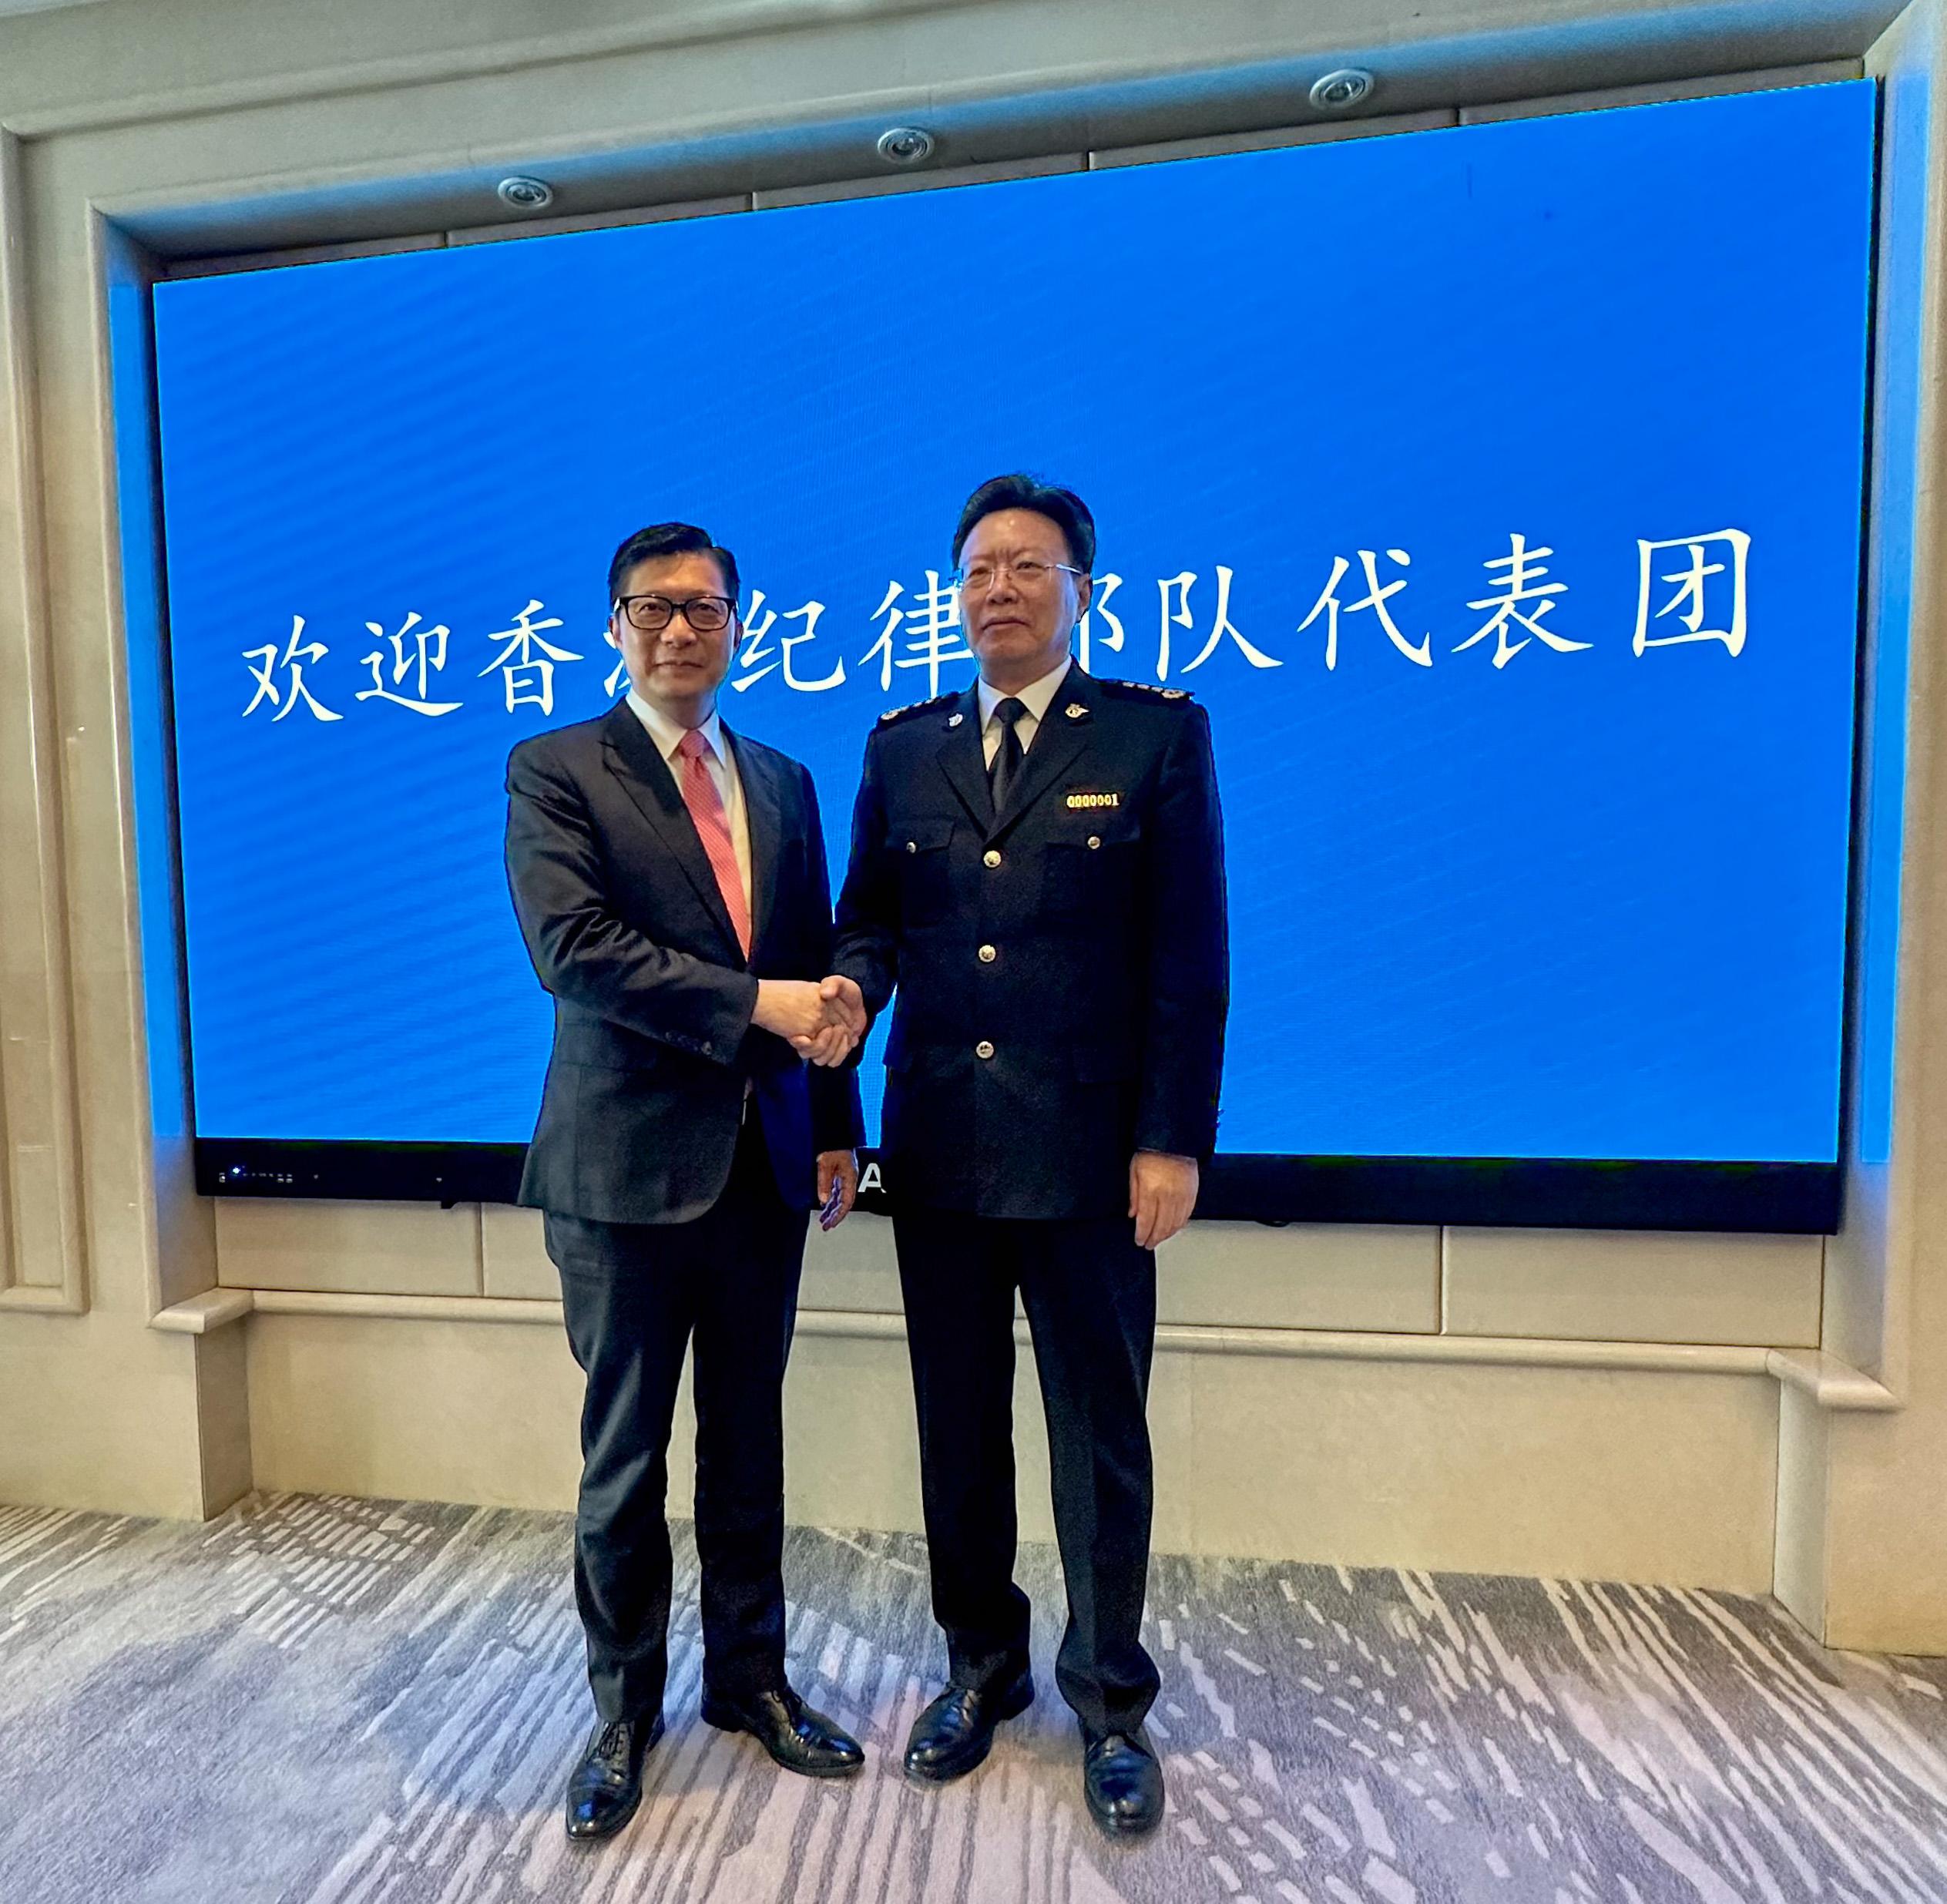 The Secretary for Security, Mr Tang Ping-keung, continued the second day of his visit to Beijing today (April 25). Photo shows Mr Tang (left) calling on the Minister of the General Administration of Customs of the People's Republic of China, Mr Yu Jianhua (right).